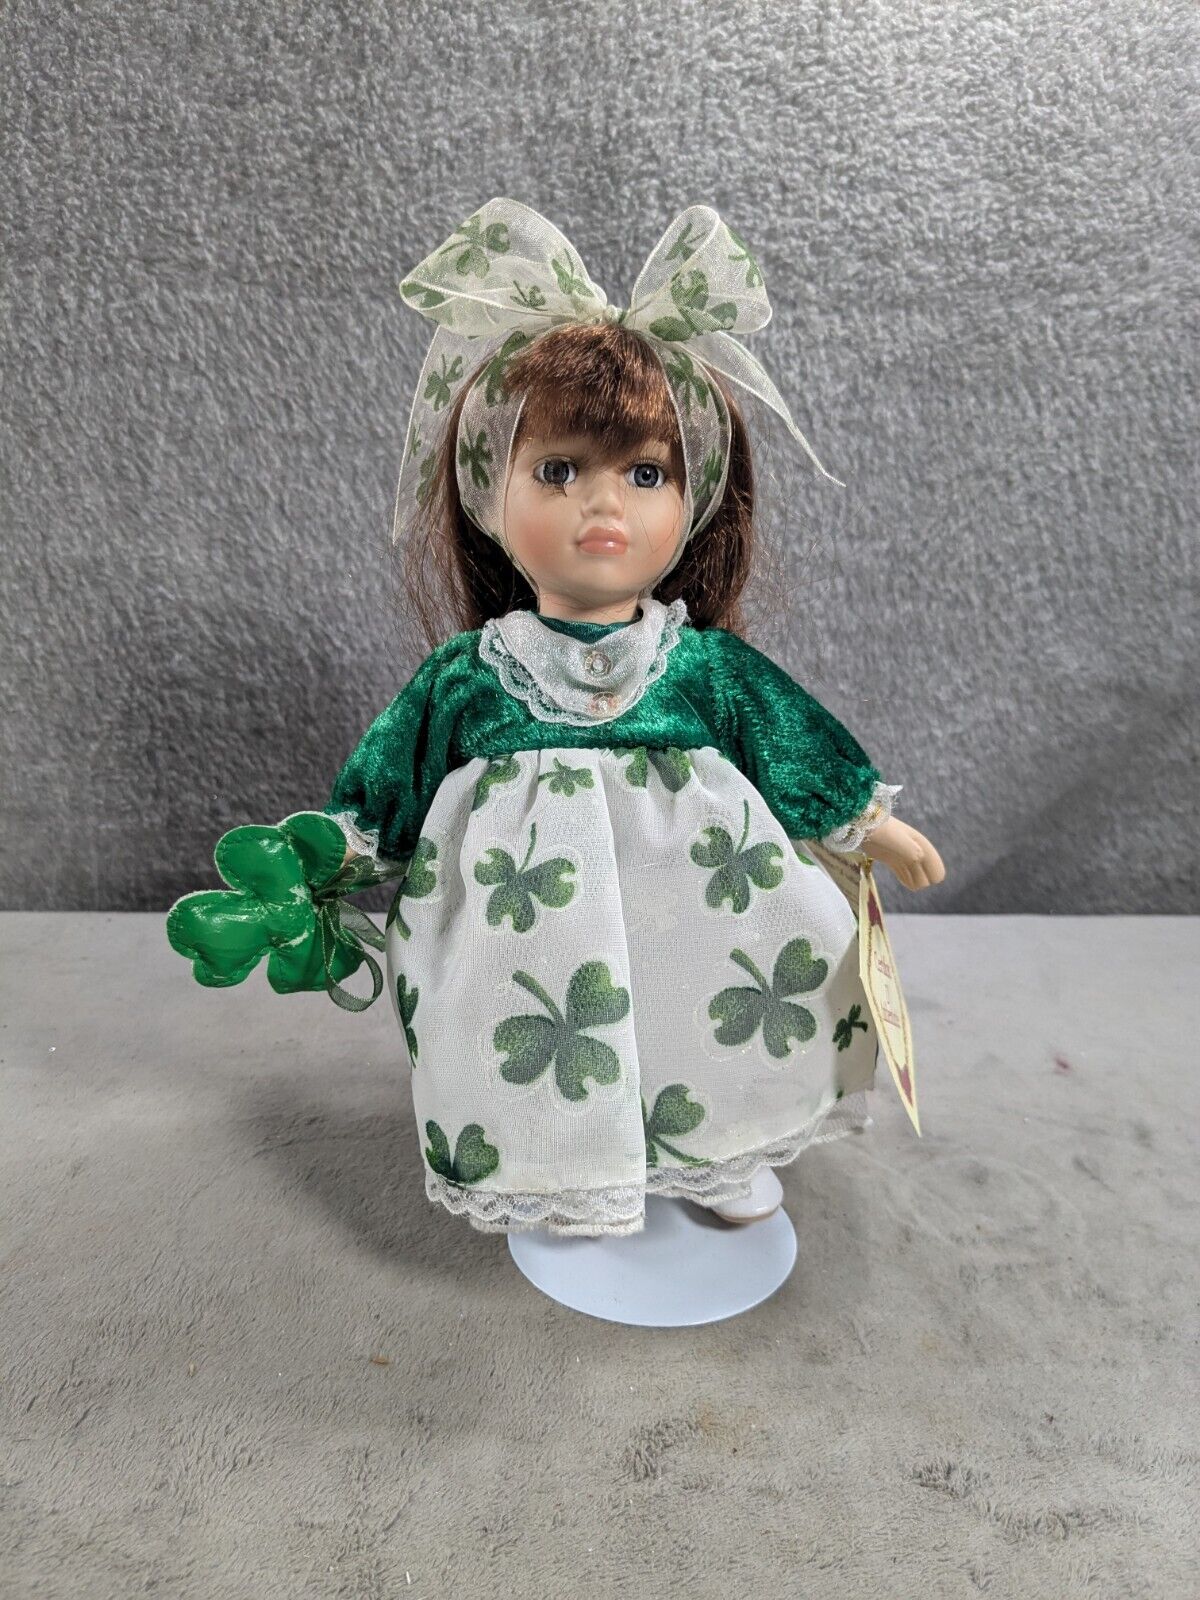 Cute St. Patricks Day Collection Girl Doll  With 4 Leaf Clover Dress 9\